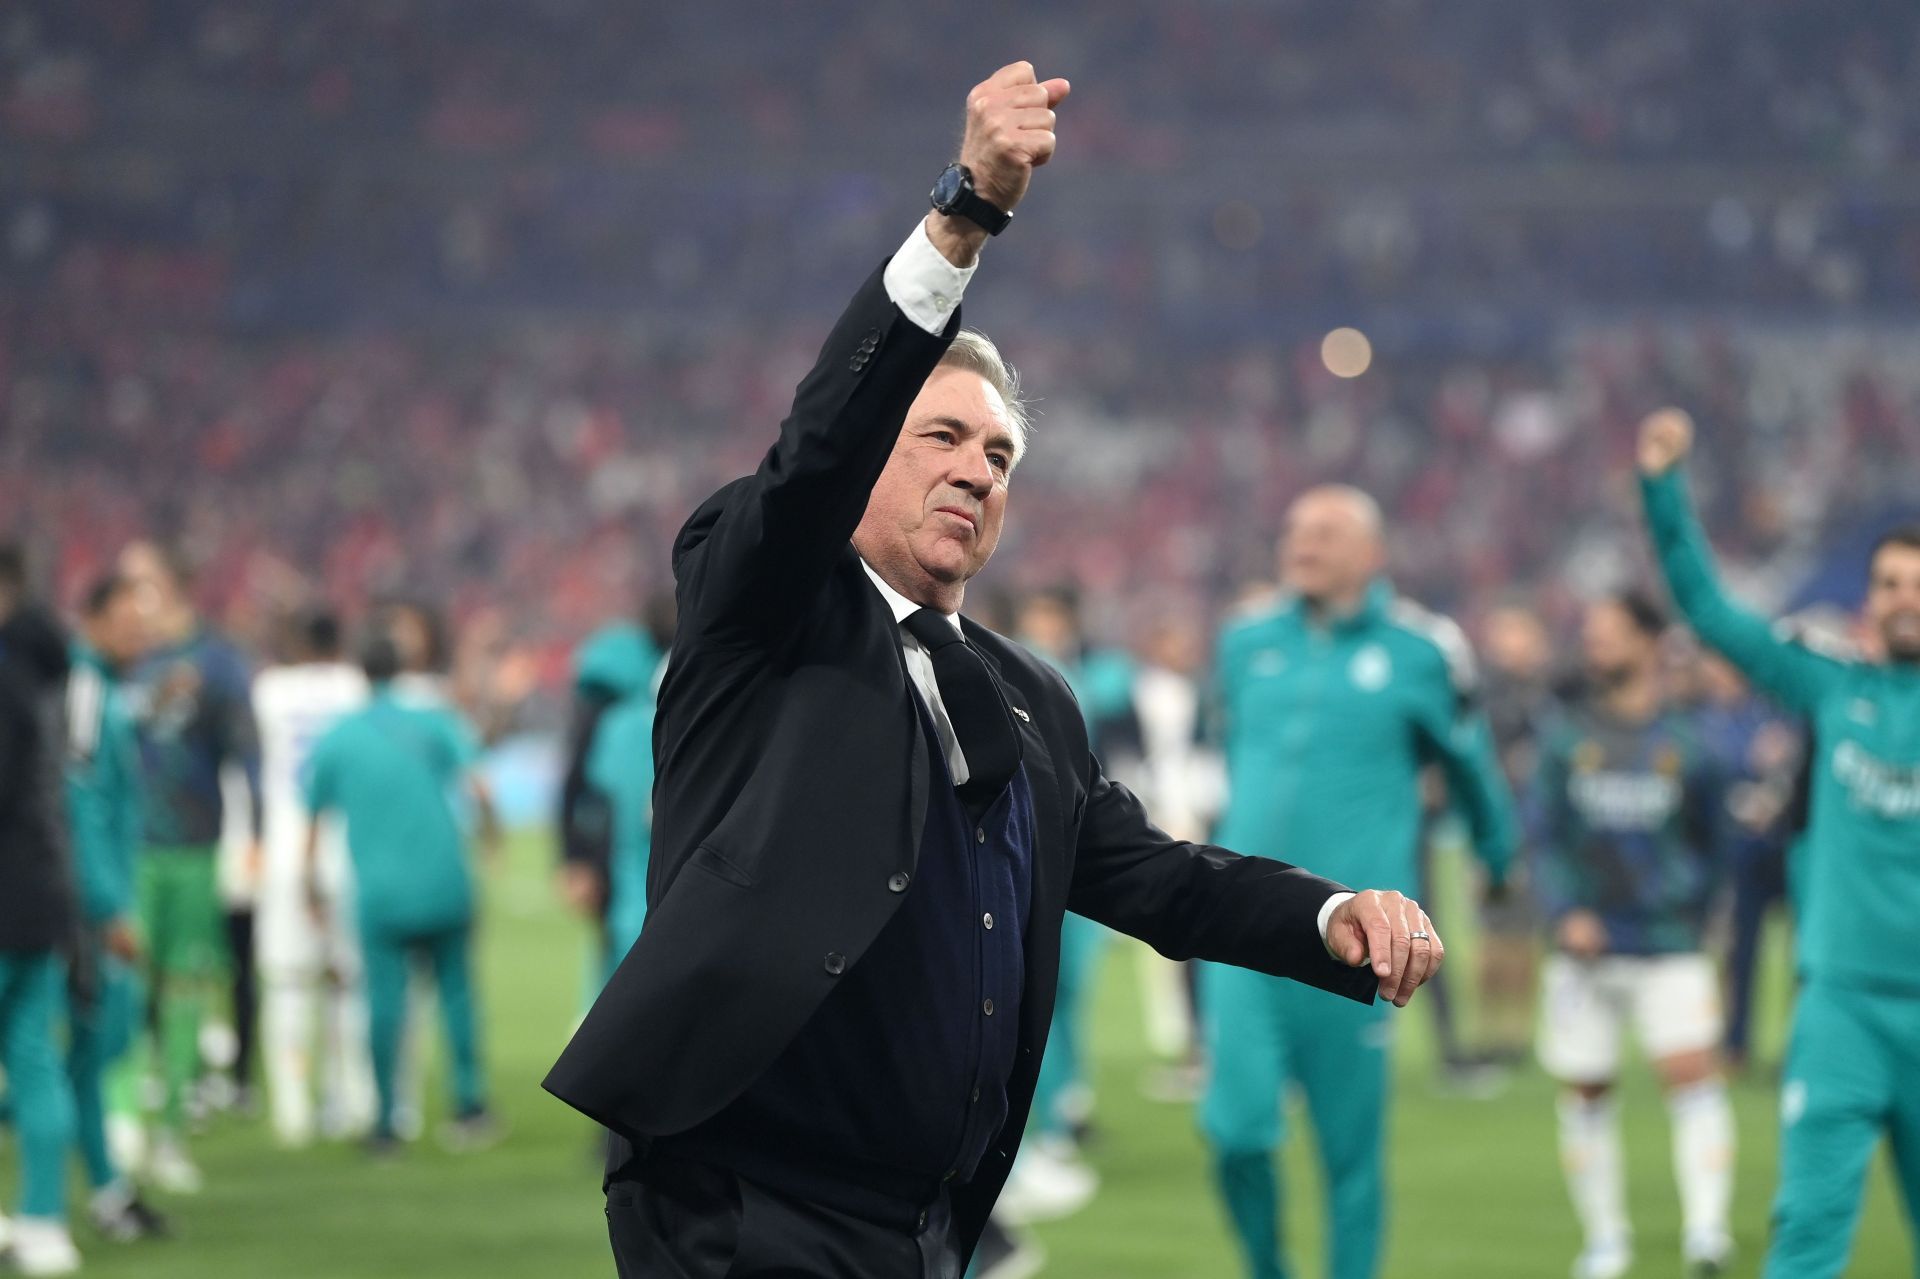 Real Madrid manager Carlo Ancelotti is eyeing more silverware.